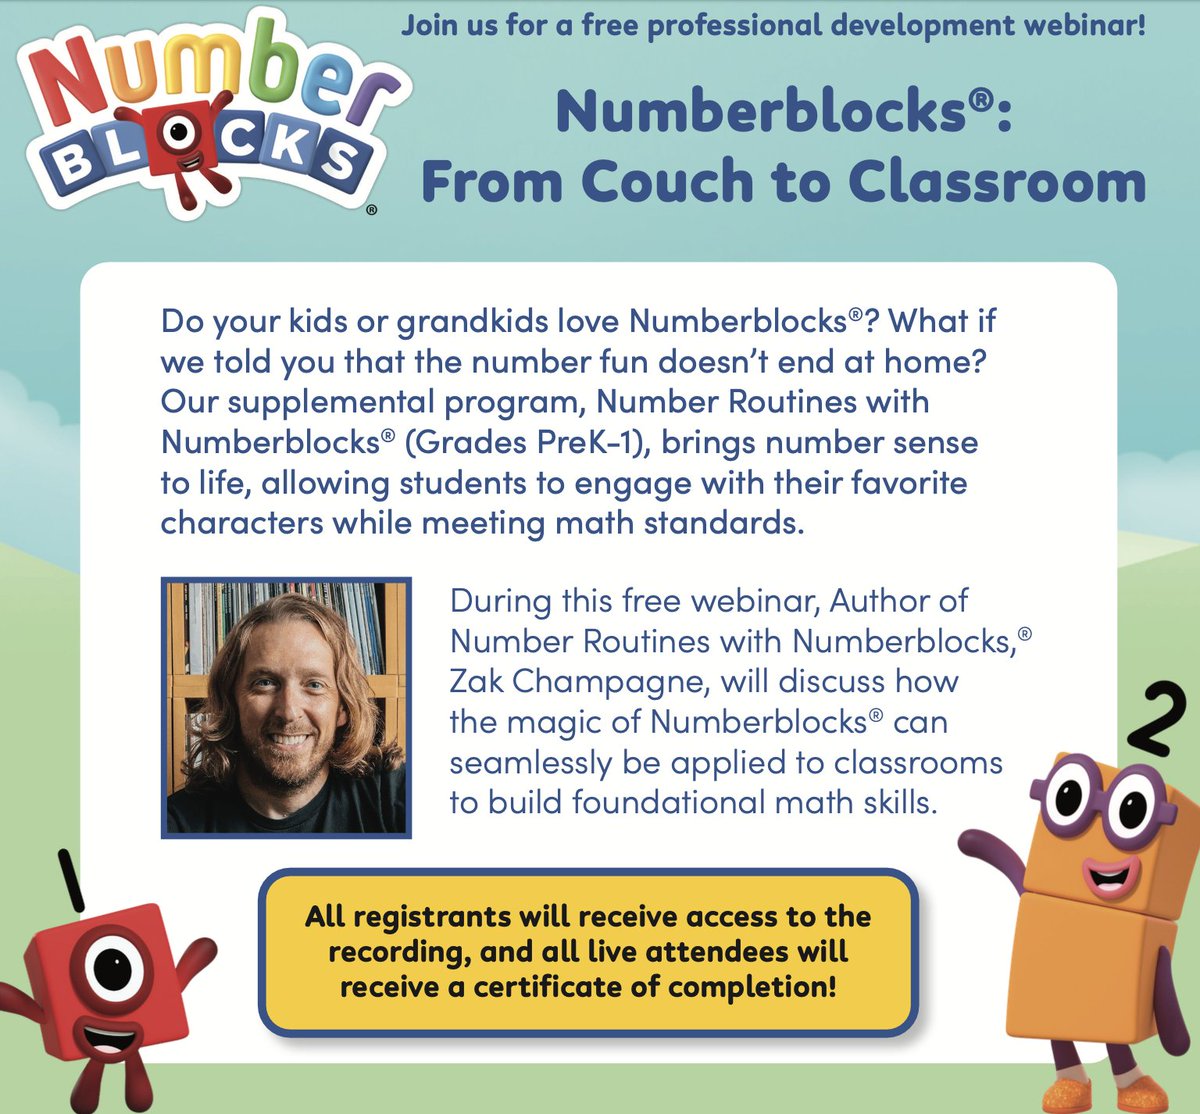 I'm lucky to have a great partnership with my friends over at @hand2mind!

Come learn together as we think about how to take the experiences we have with NumberBlocks from the couch to the classroom!

I'll join you there. 

Free Registration here: us02web.zoom.us/webinar/regist…